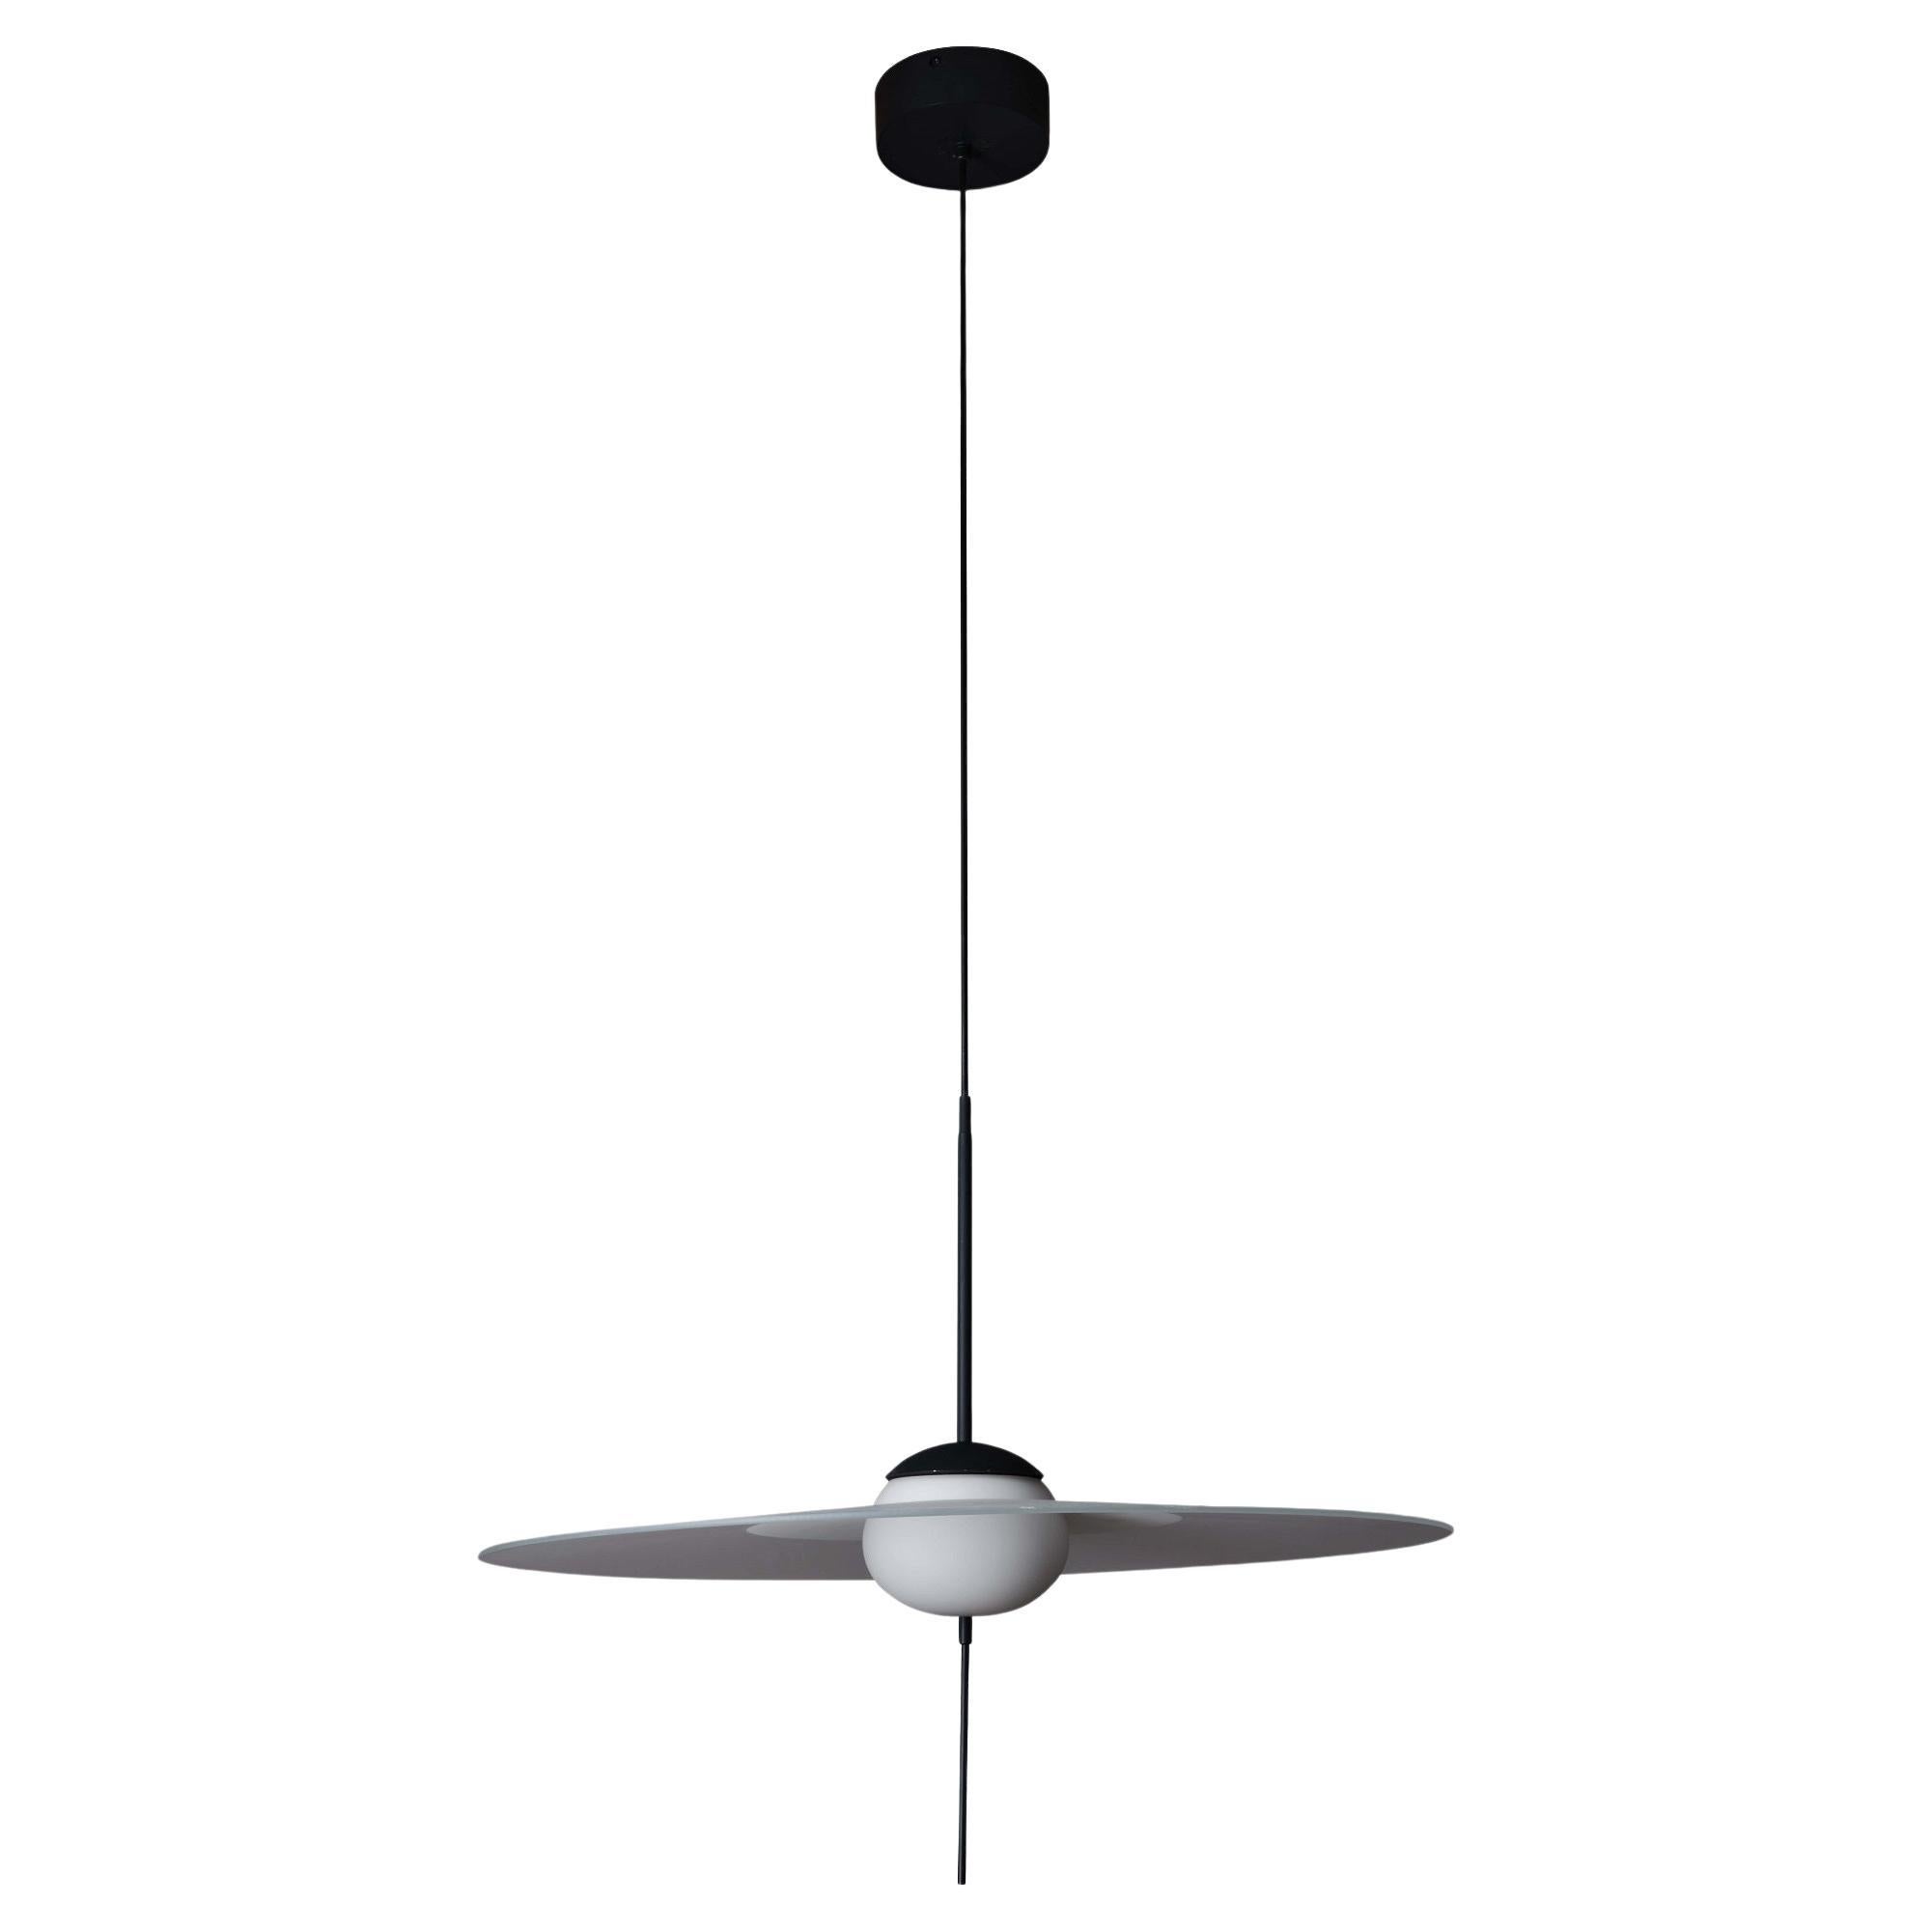 DCW Editions Mono M600 Pendant Lamp in Dark Grey Aluminum and Glass by Vantot